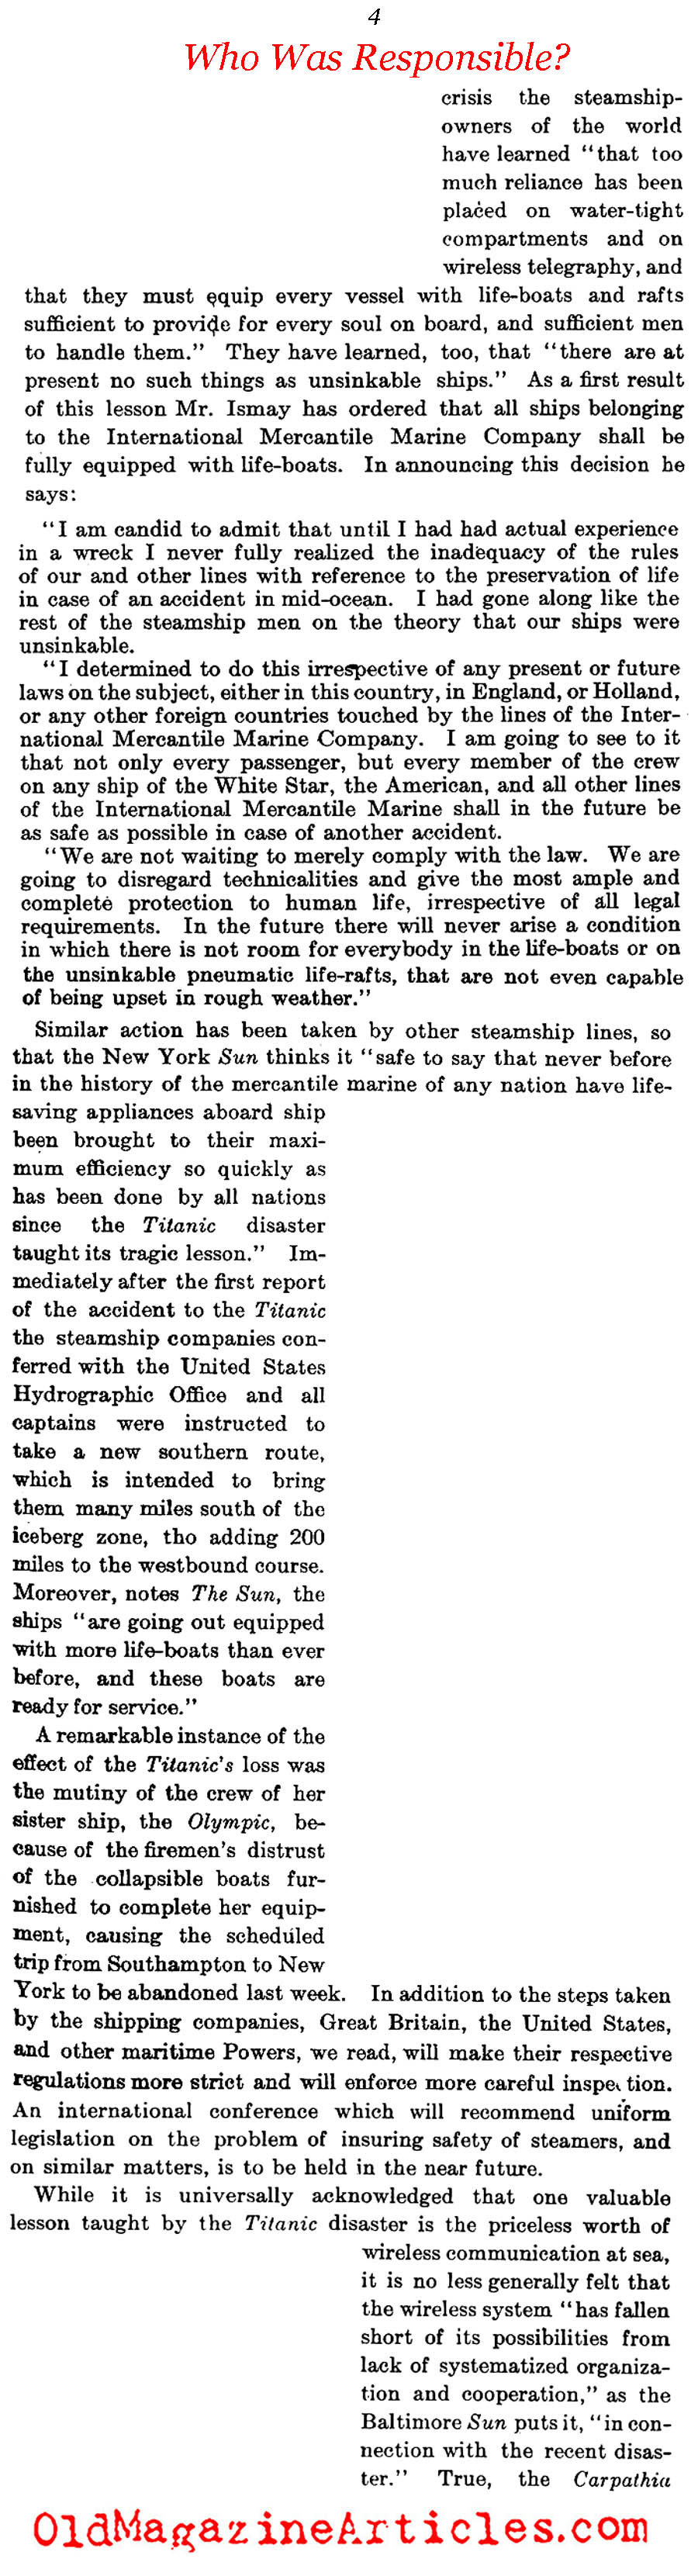 Responsibility for the <em>Titanic</em> Disaster  (The Literary Digest, 1912)